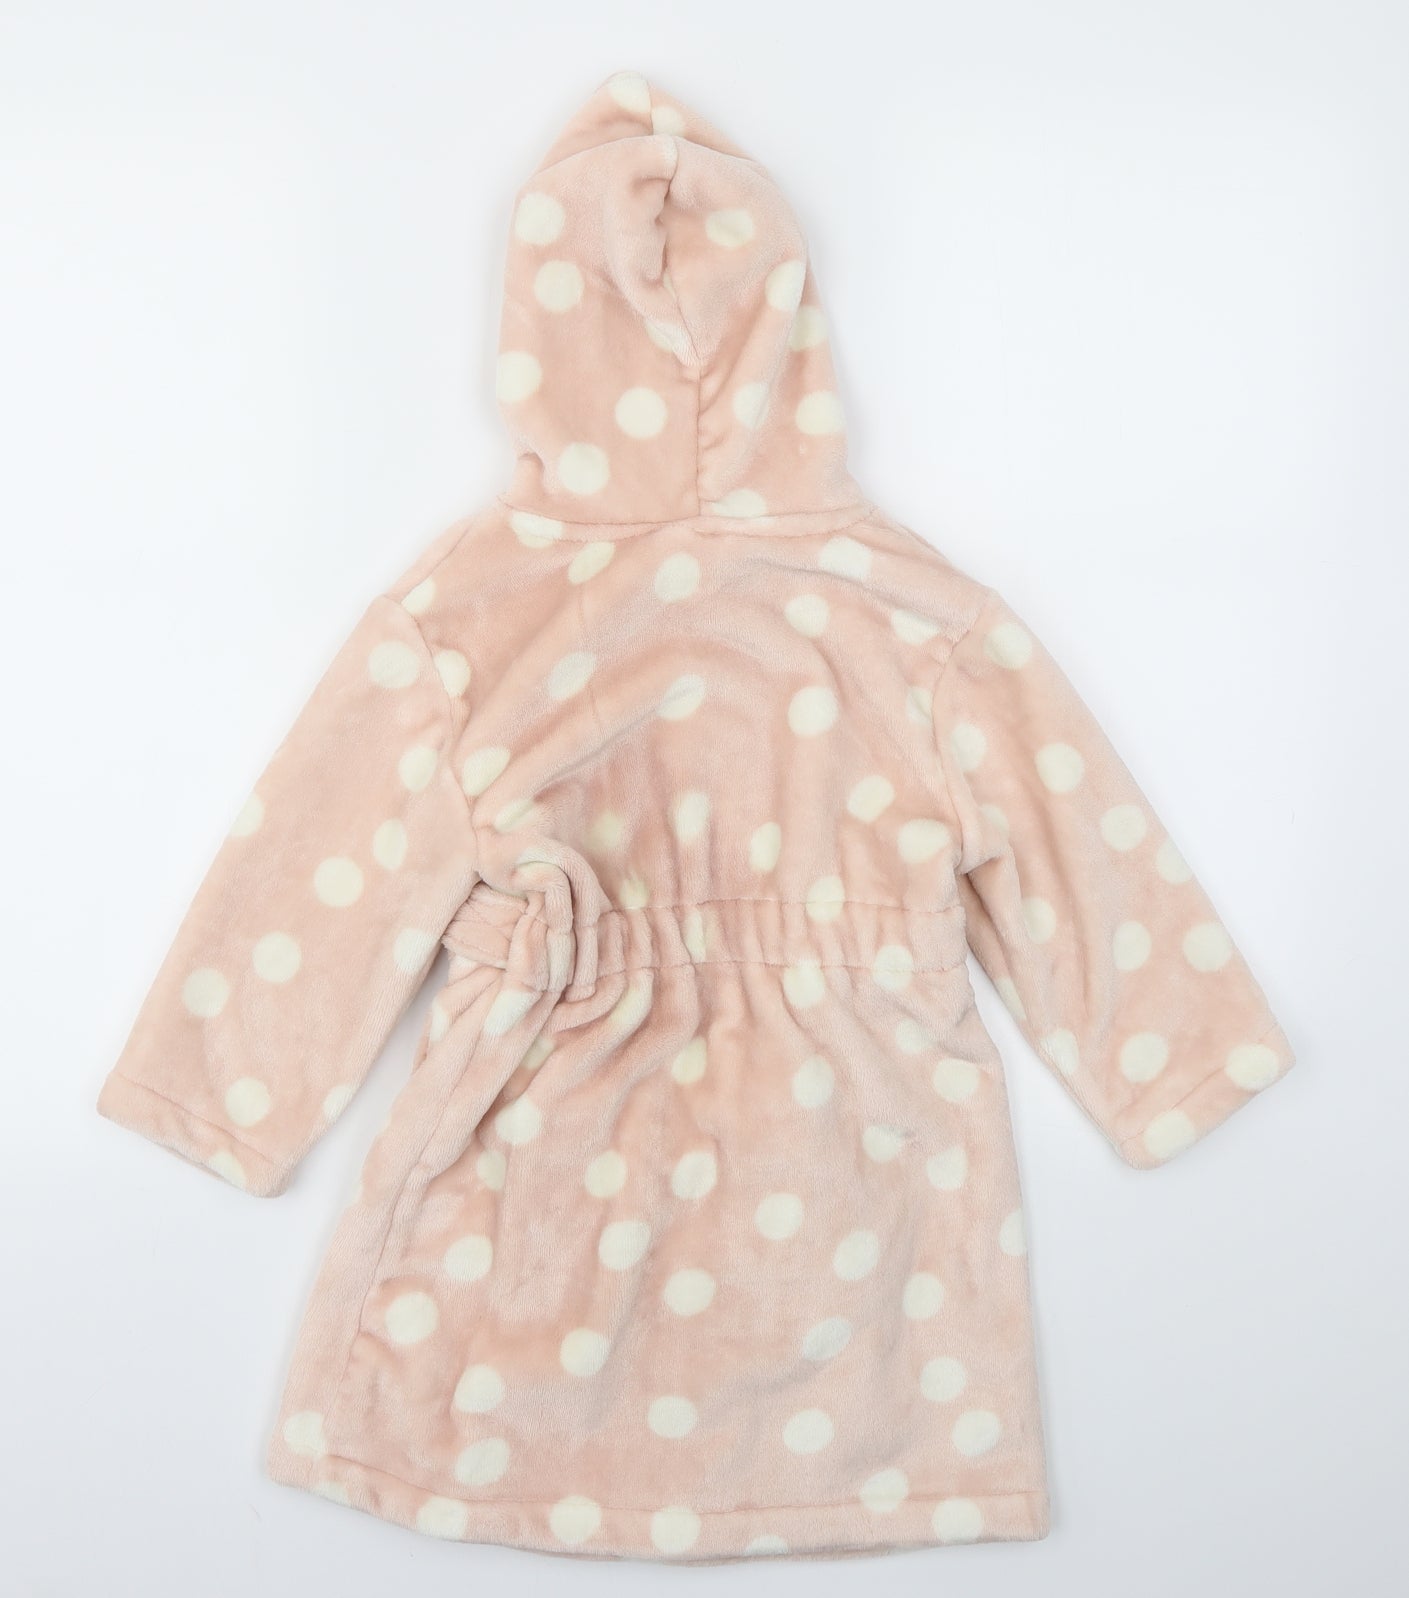 George Girls Pink Polka Dot  Top Gown Size 3-4 Years